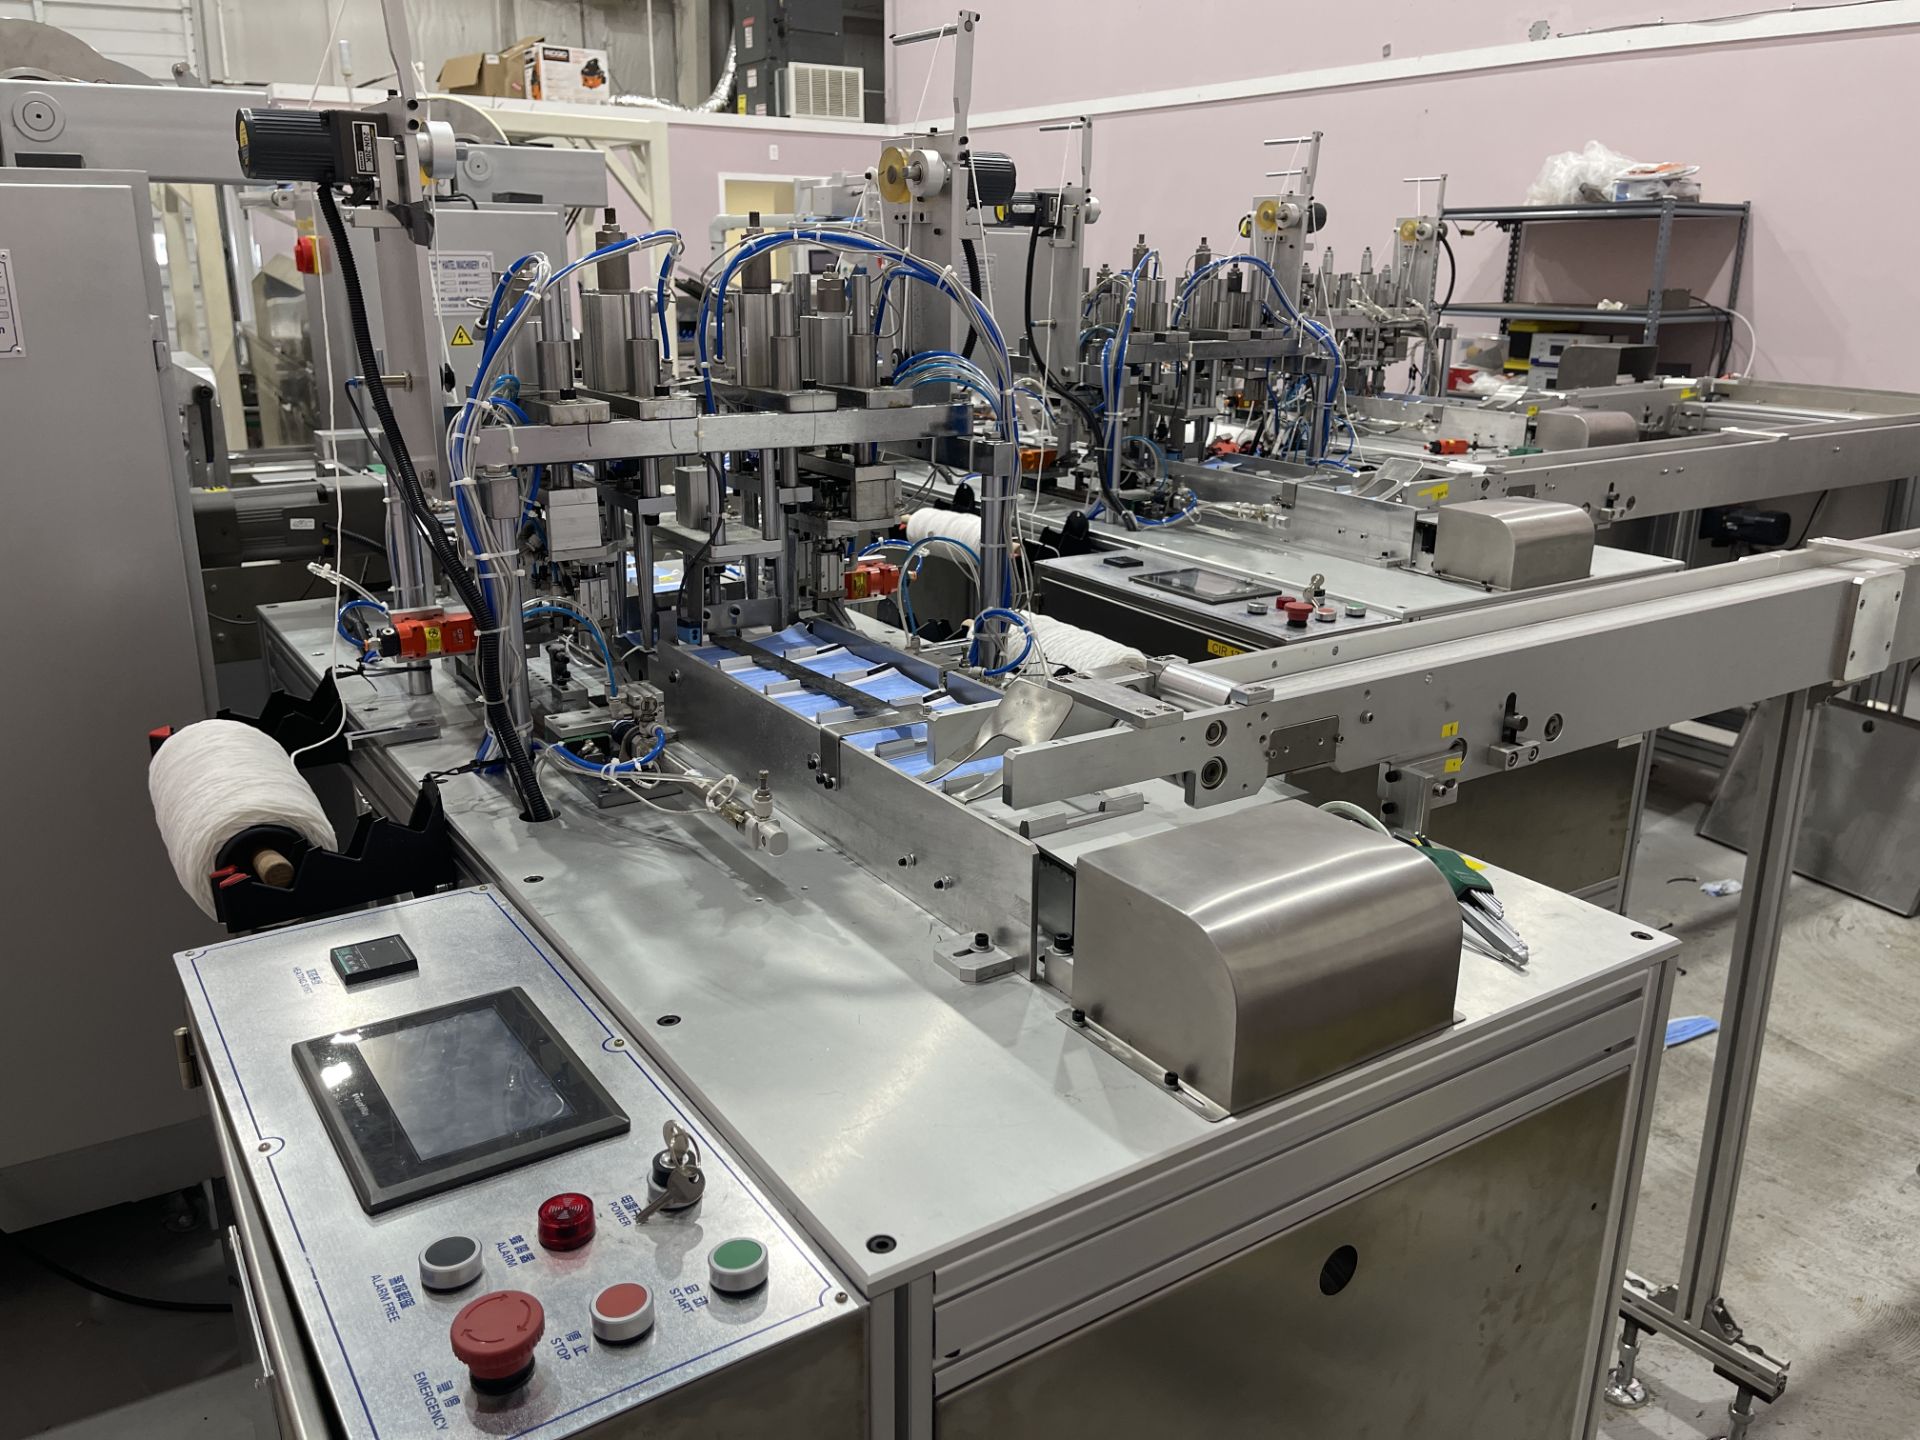 COMPLETE PACKAGE: 2020 3-Ply Disposable Medical Mask Assembly & Packaging Line Equipment, Includes: - Image 138 of 150